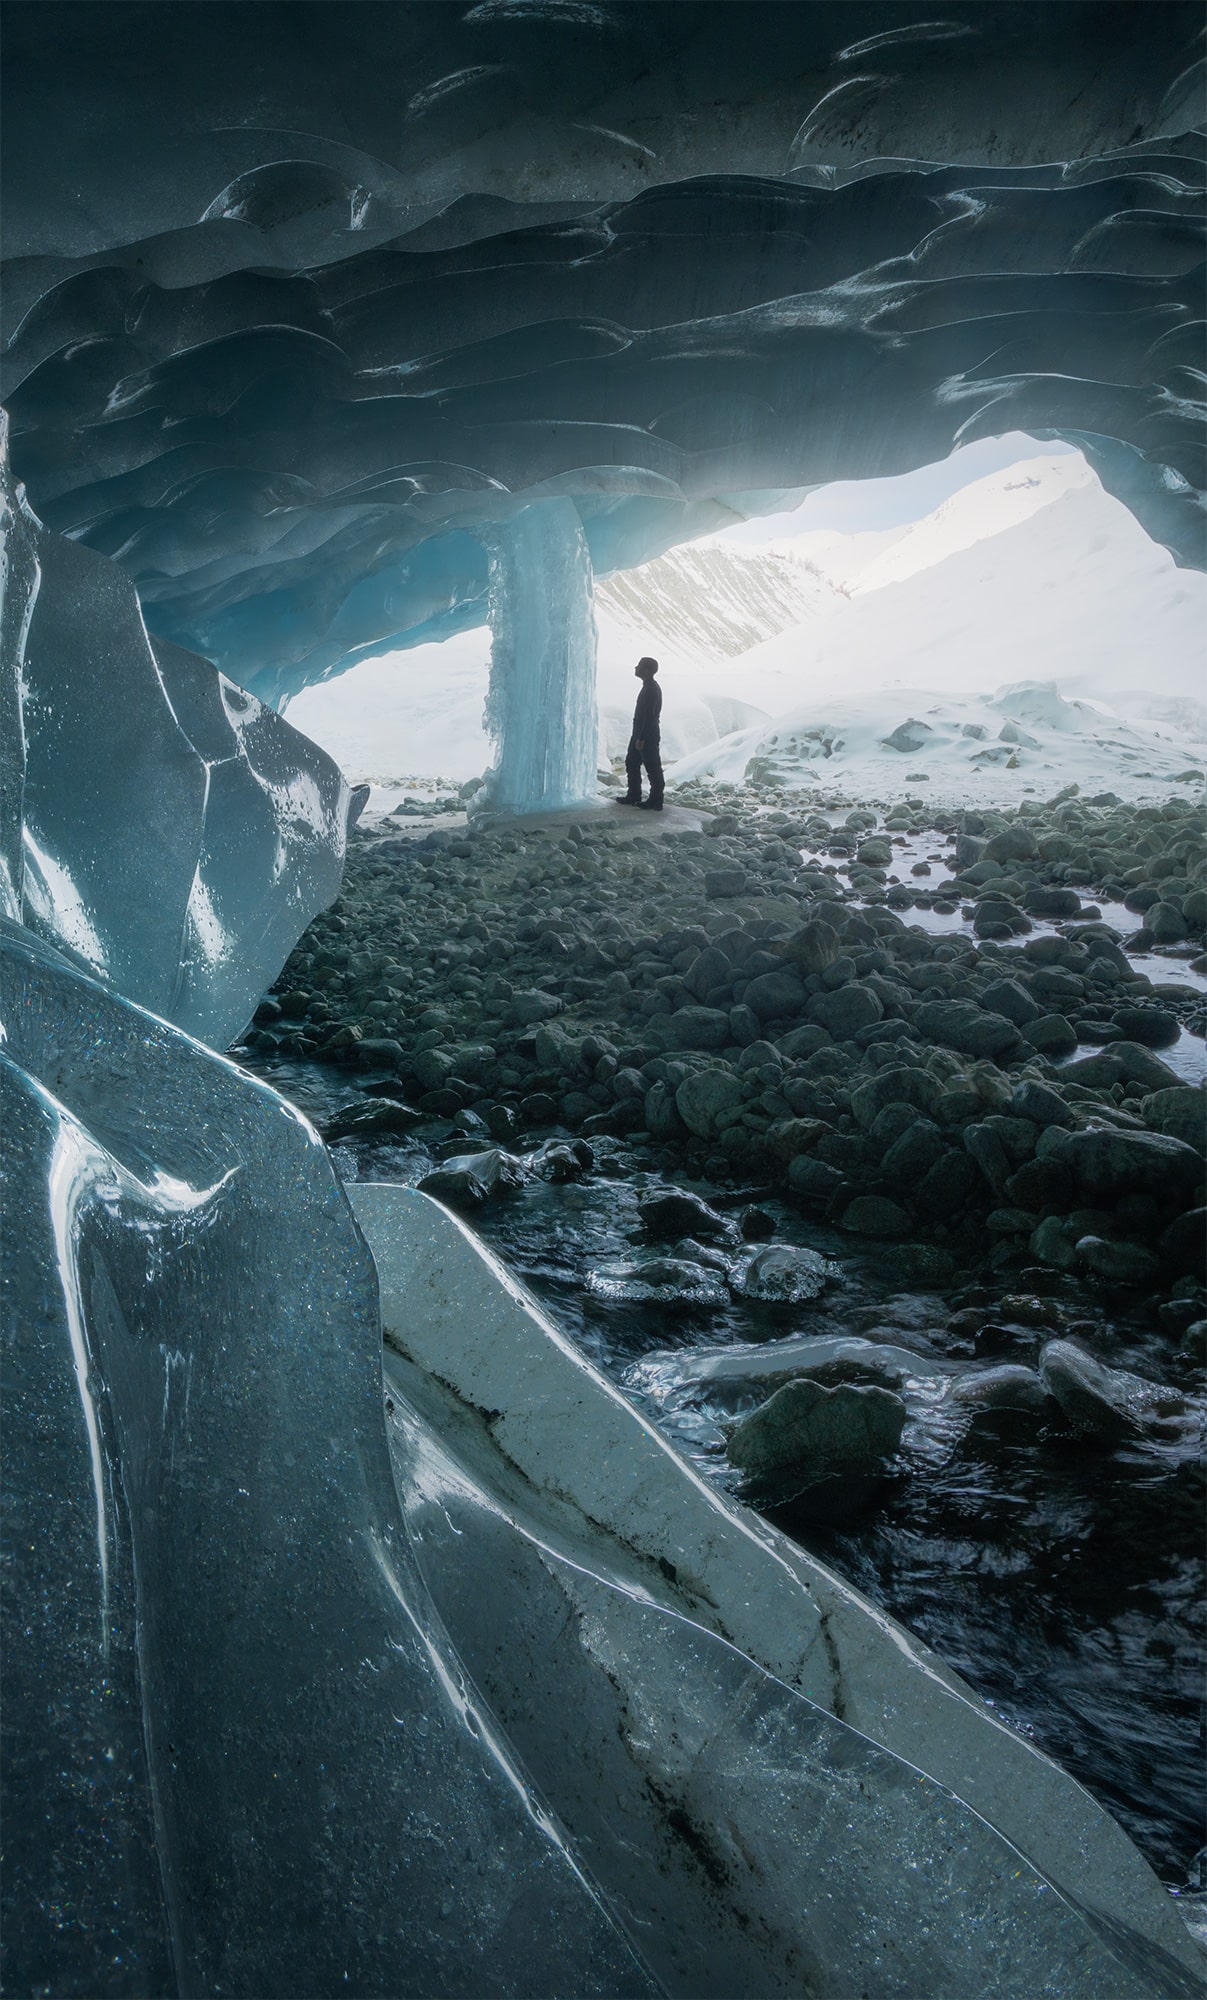 Explore the breathtaking panorama of the Zinal Glacier Ice Cave nestled in the picturesque Swiss Alps. Captured with skill and precision by acclaimed photographer Jennifer Esseiva using her Nikon Z8, this epic landscape photography showcases the dramatic beauty of this natural wonder. Prepare to be enchanted by the captivating vistas and intricate details of this awe-inspiring scenery.